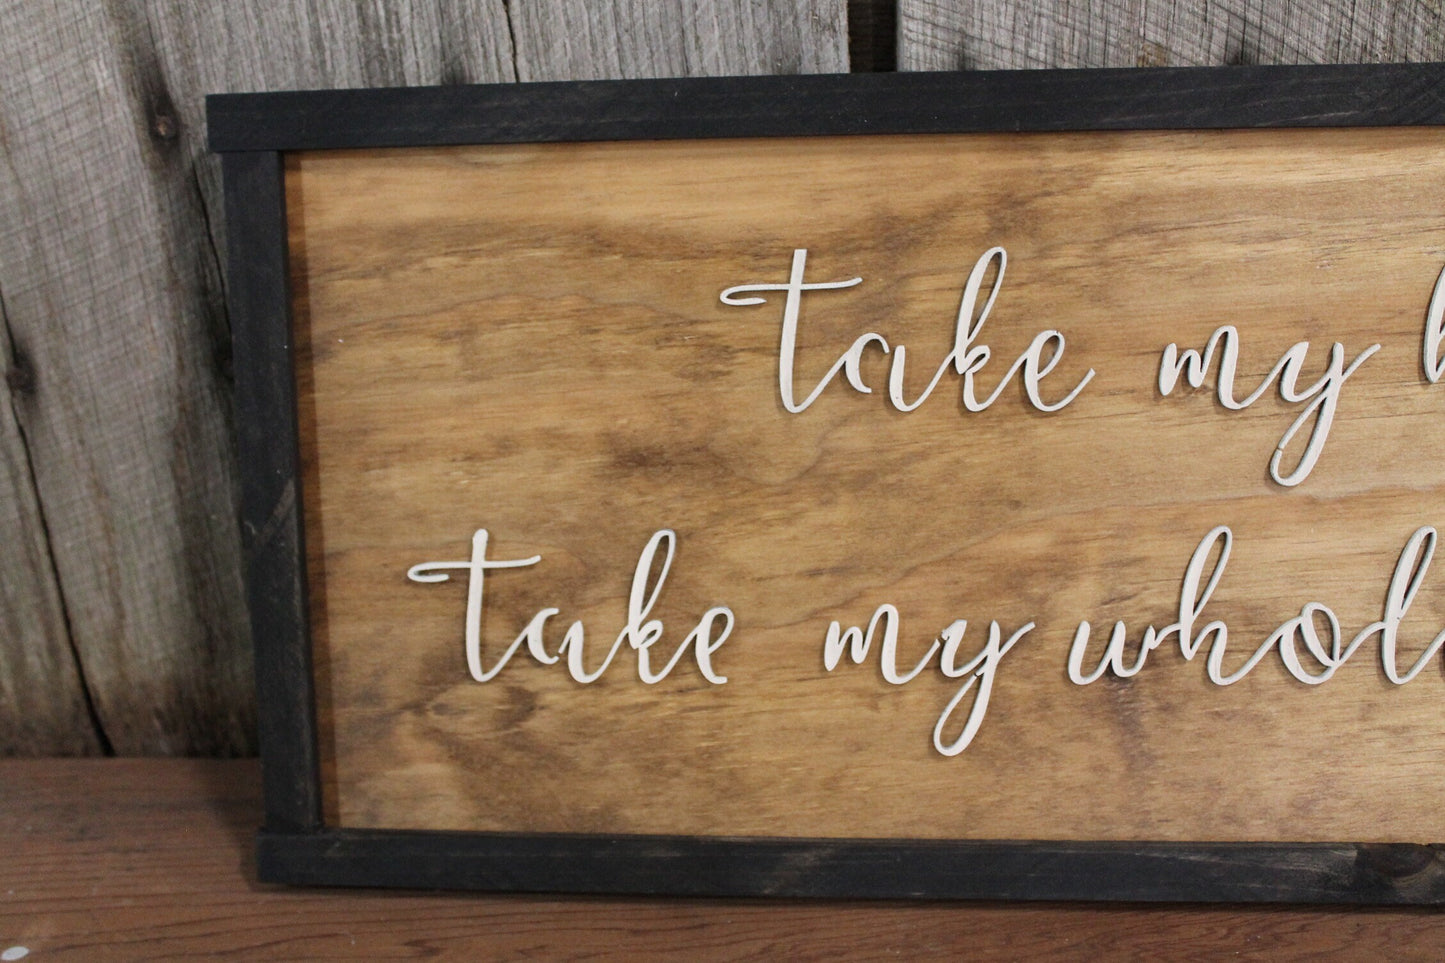 Take My Hand Sign Raised Text Wood Lord Song Lyrics Elvis Presley 3D Extra Large Framed Wood Sign Rustic Primitive Country Text Script